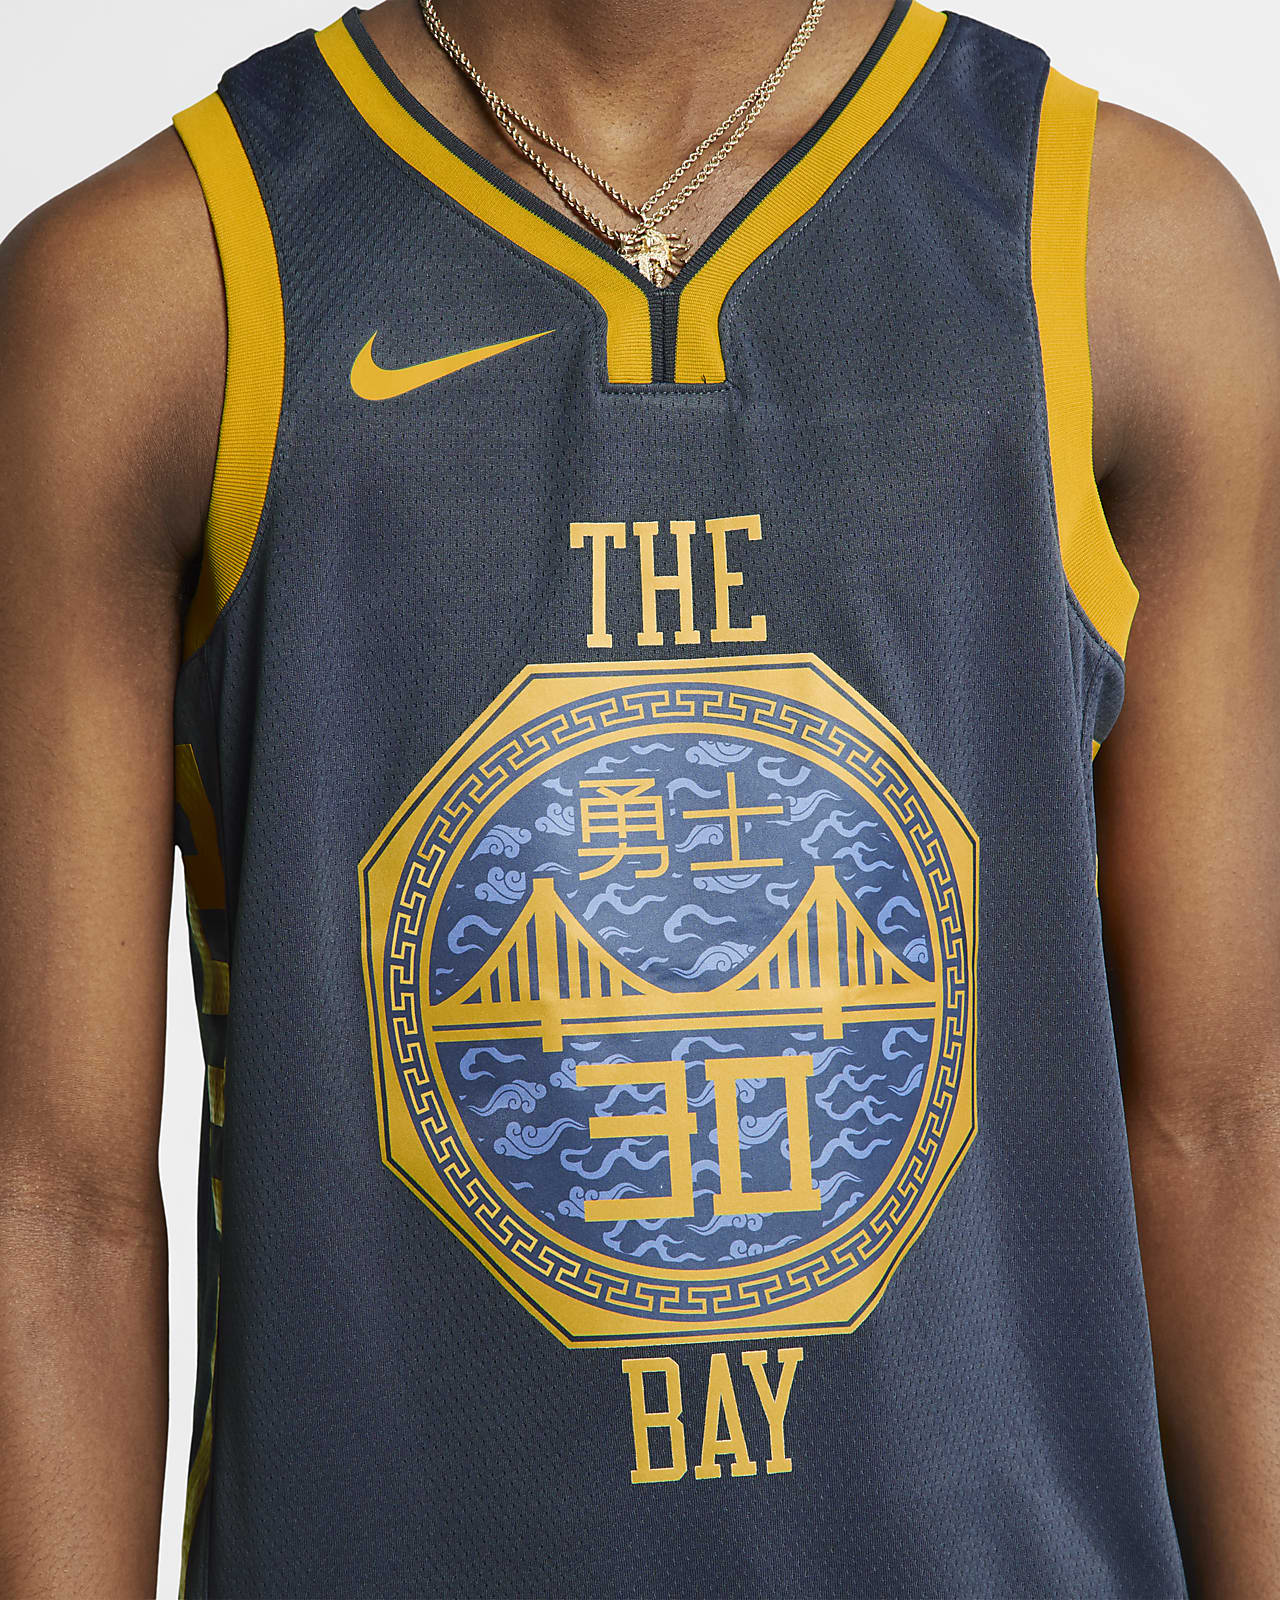 city edition golden state